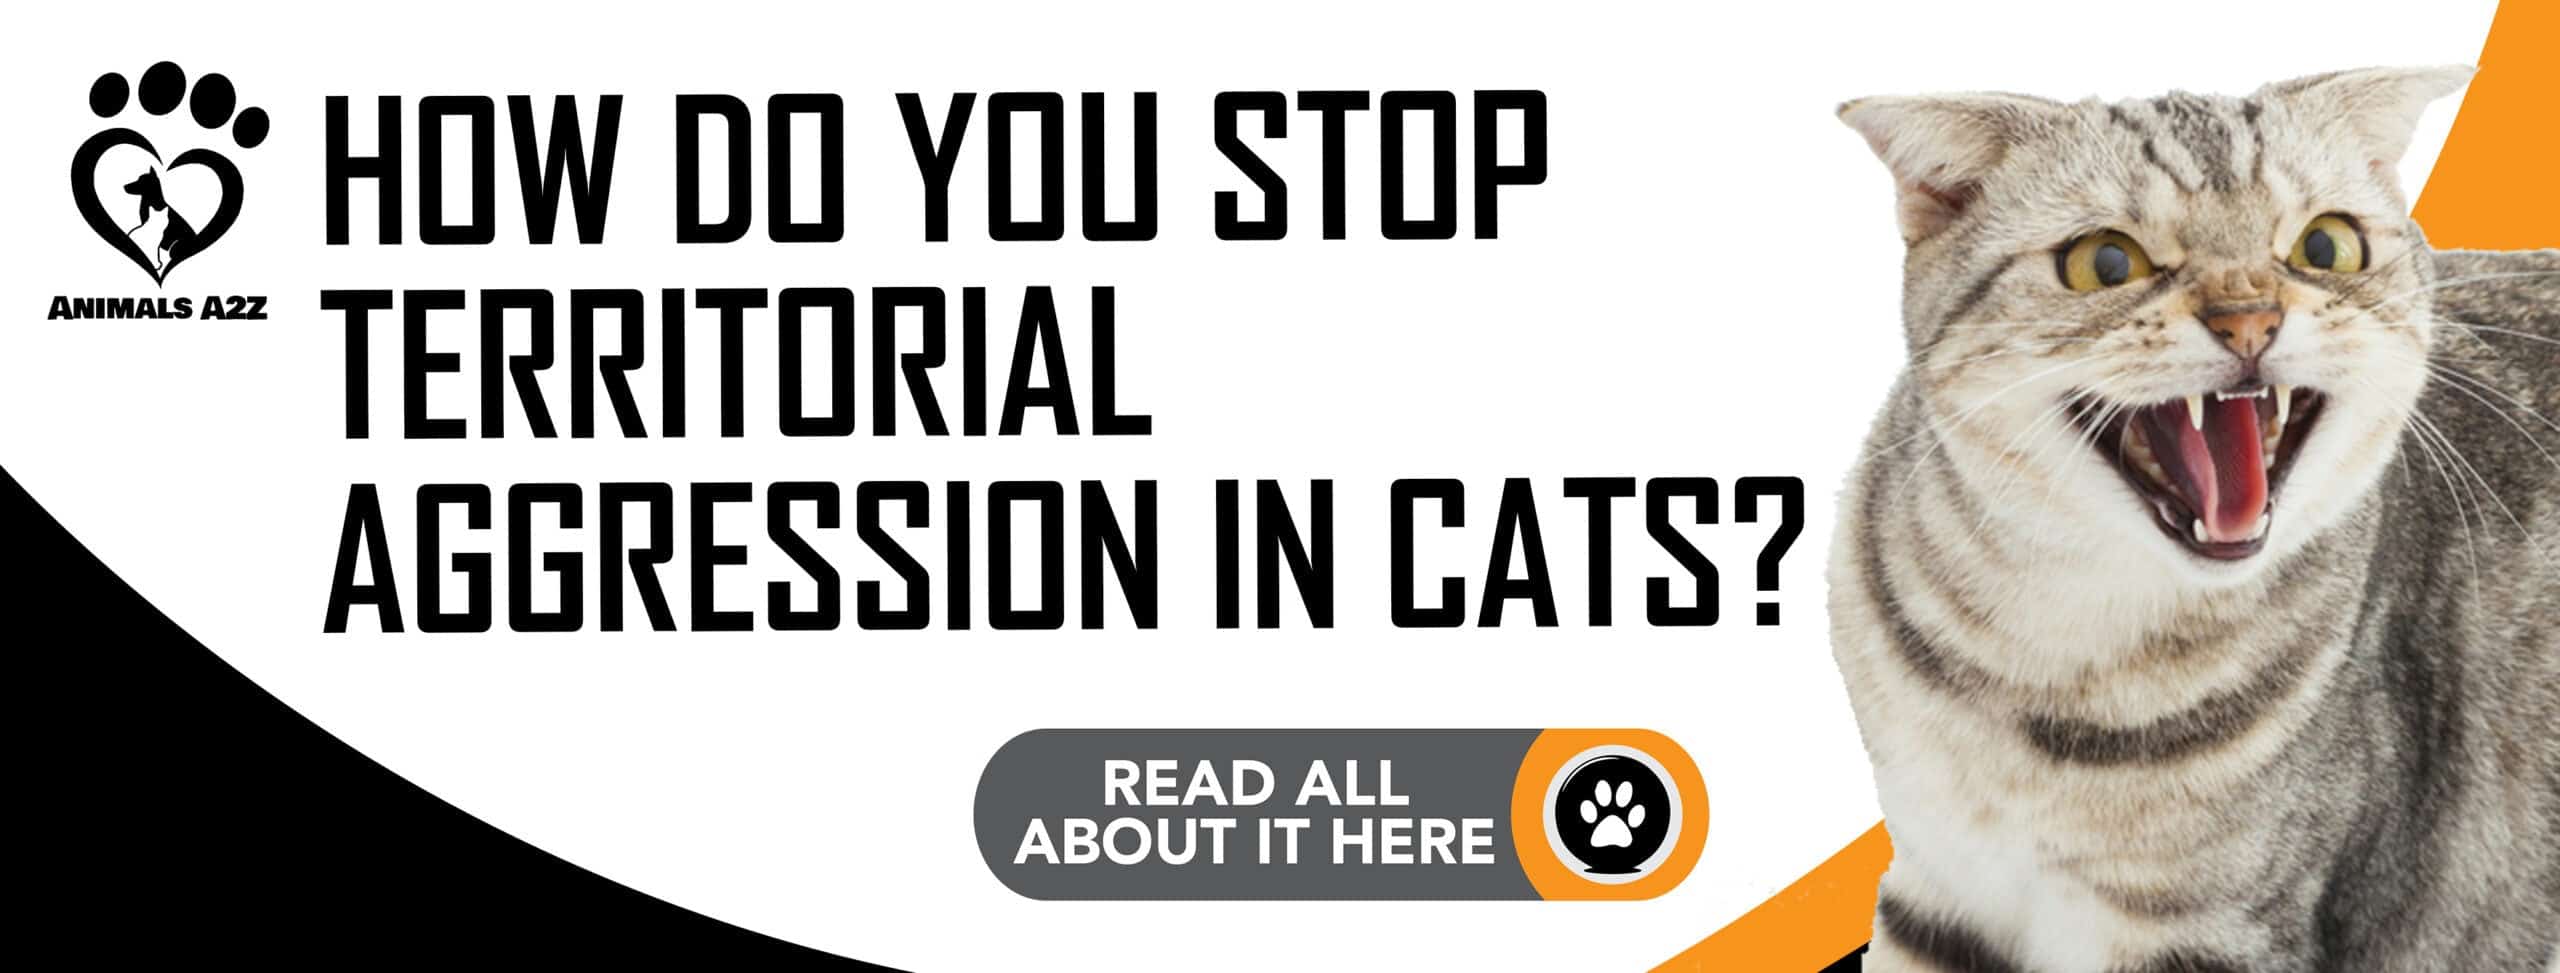 How do you stop territorial aggression in cats?